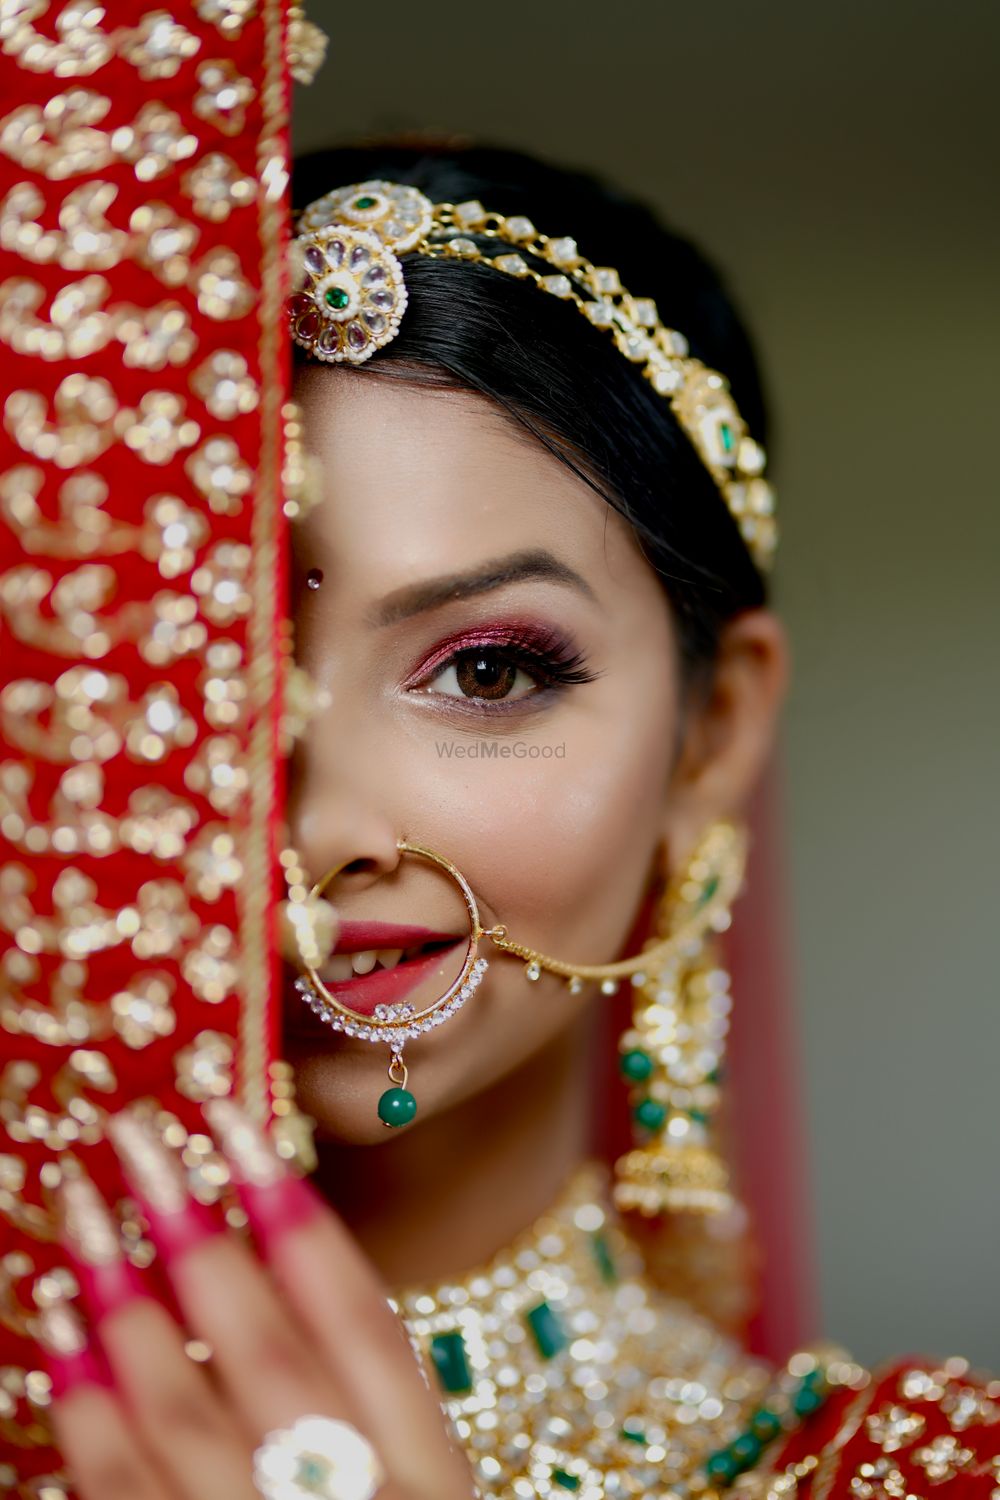 Photo From Lehenga Love - “D” day bridal looks - By Makeup by Pranshi